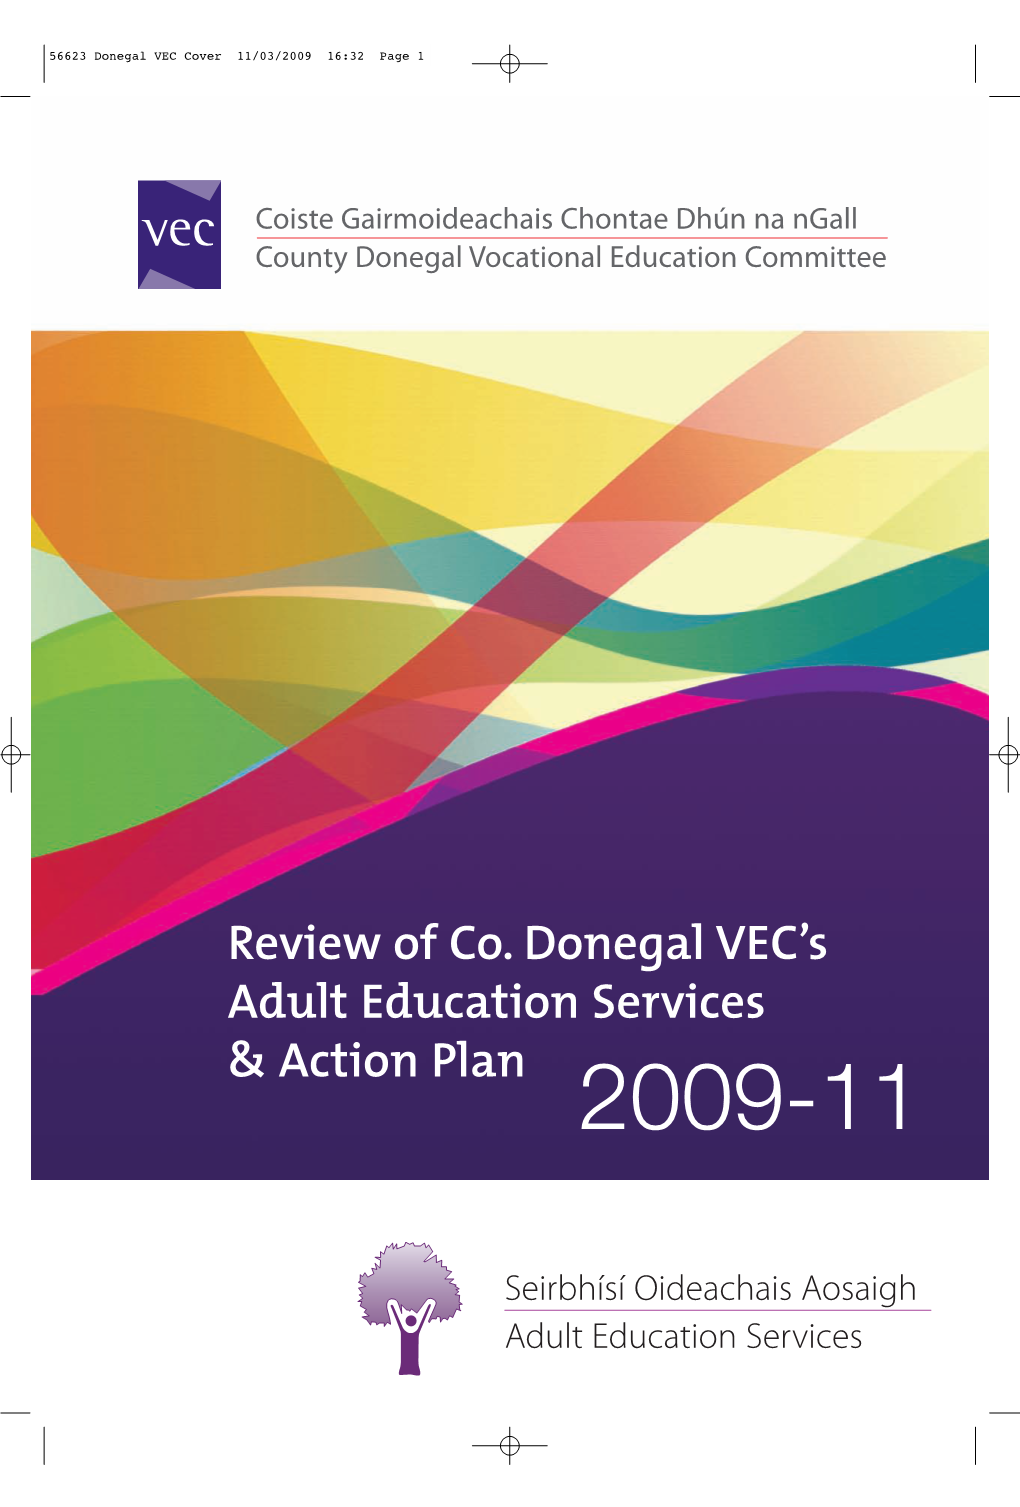 Review of Co. Donegal VEC's Adult Education Services & Action Plan